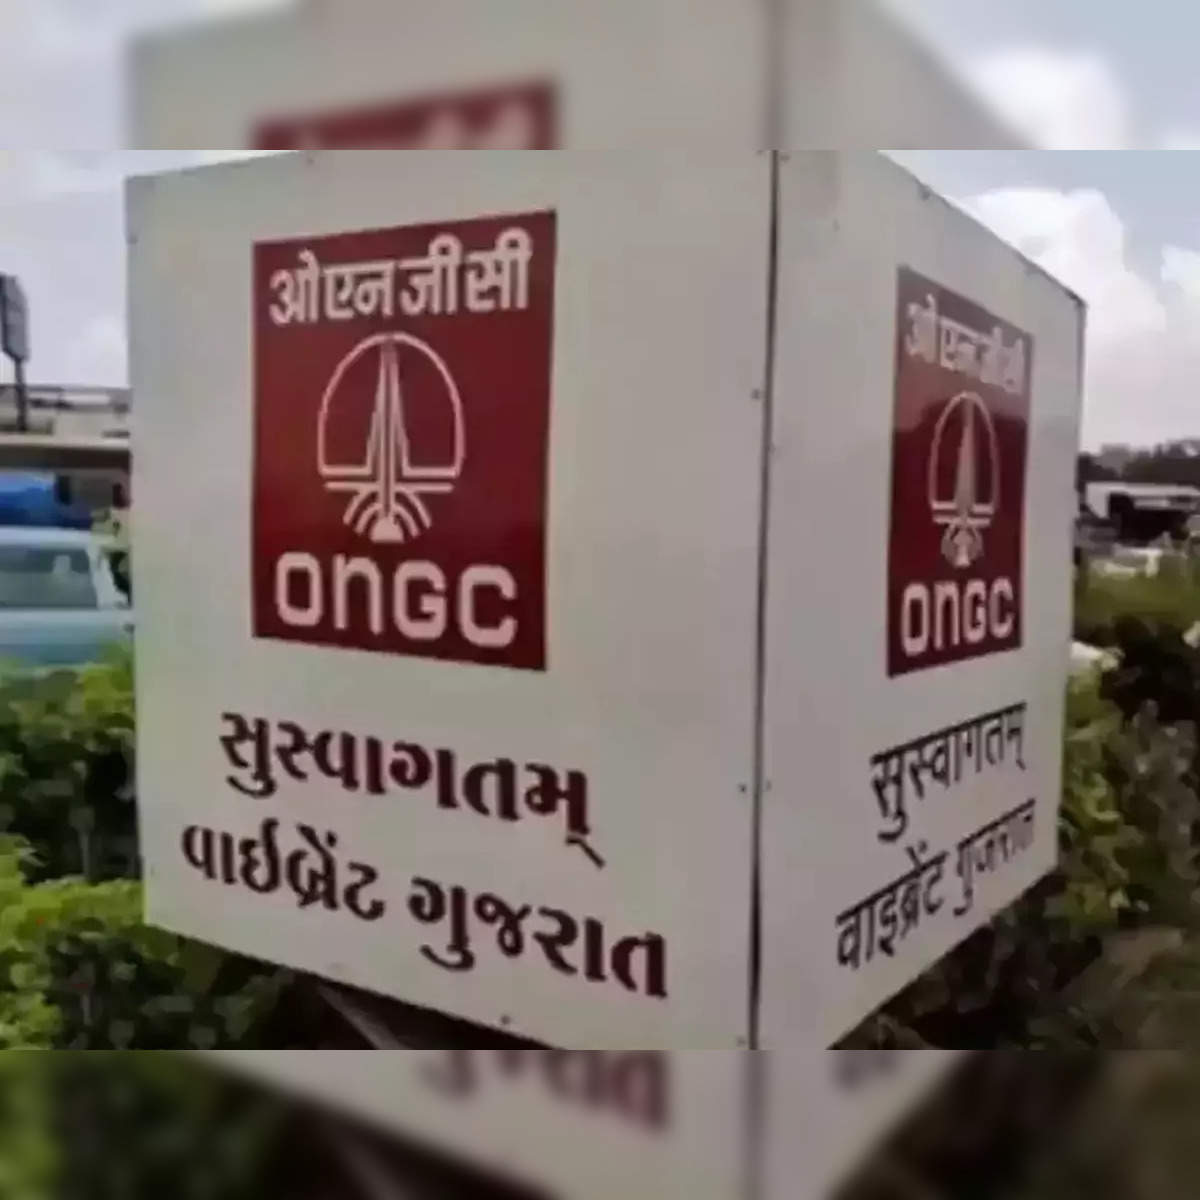 ONGC to invest Rs 1 tn to achieve net zero carbon emissions by 2038